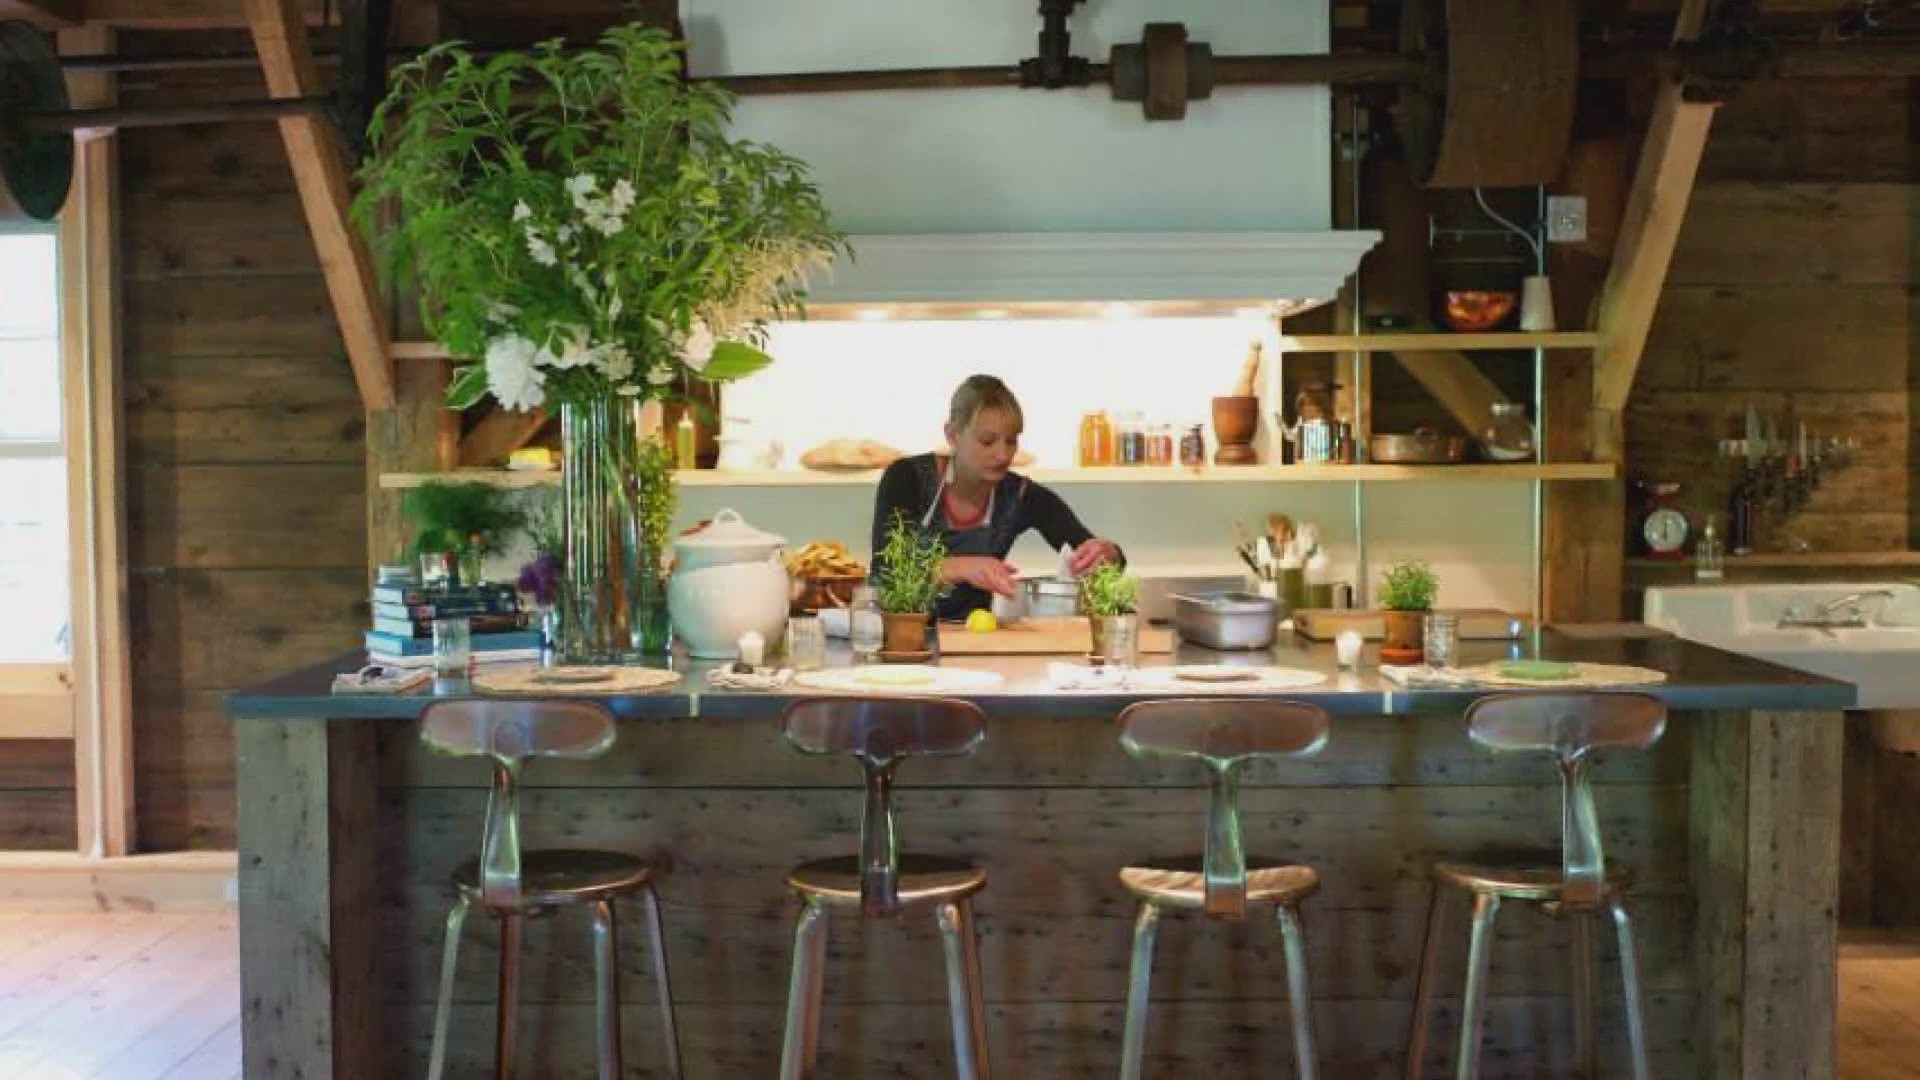 Erin French began cooking for family & friends, now she runs The Lost Kitchen.